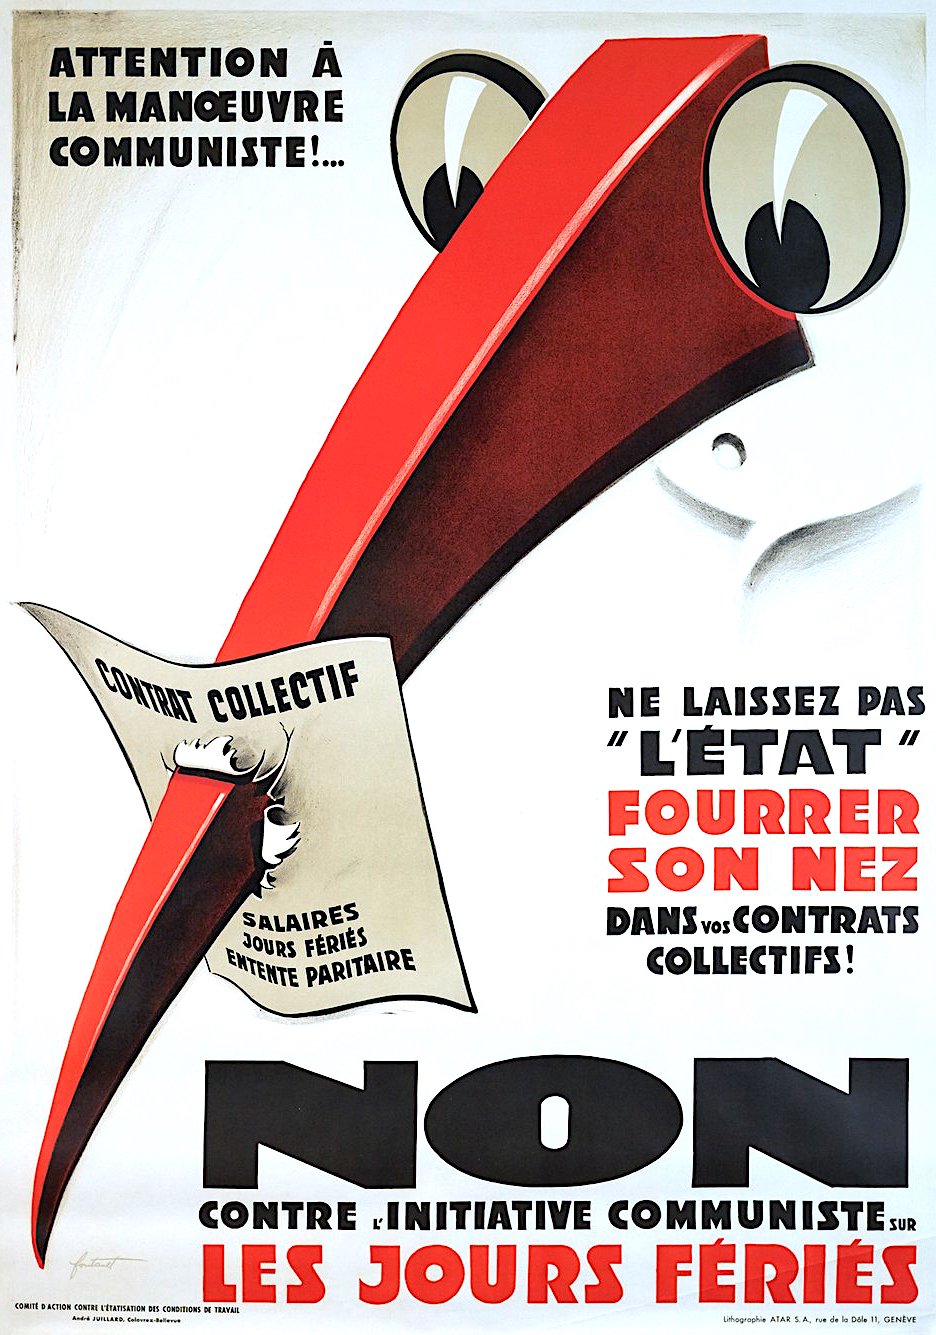 political poster by Noel Fontanet